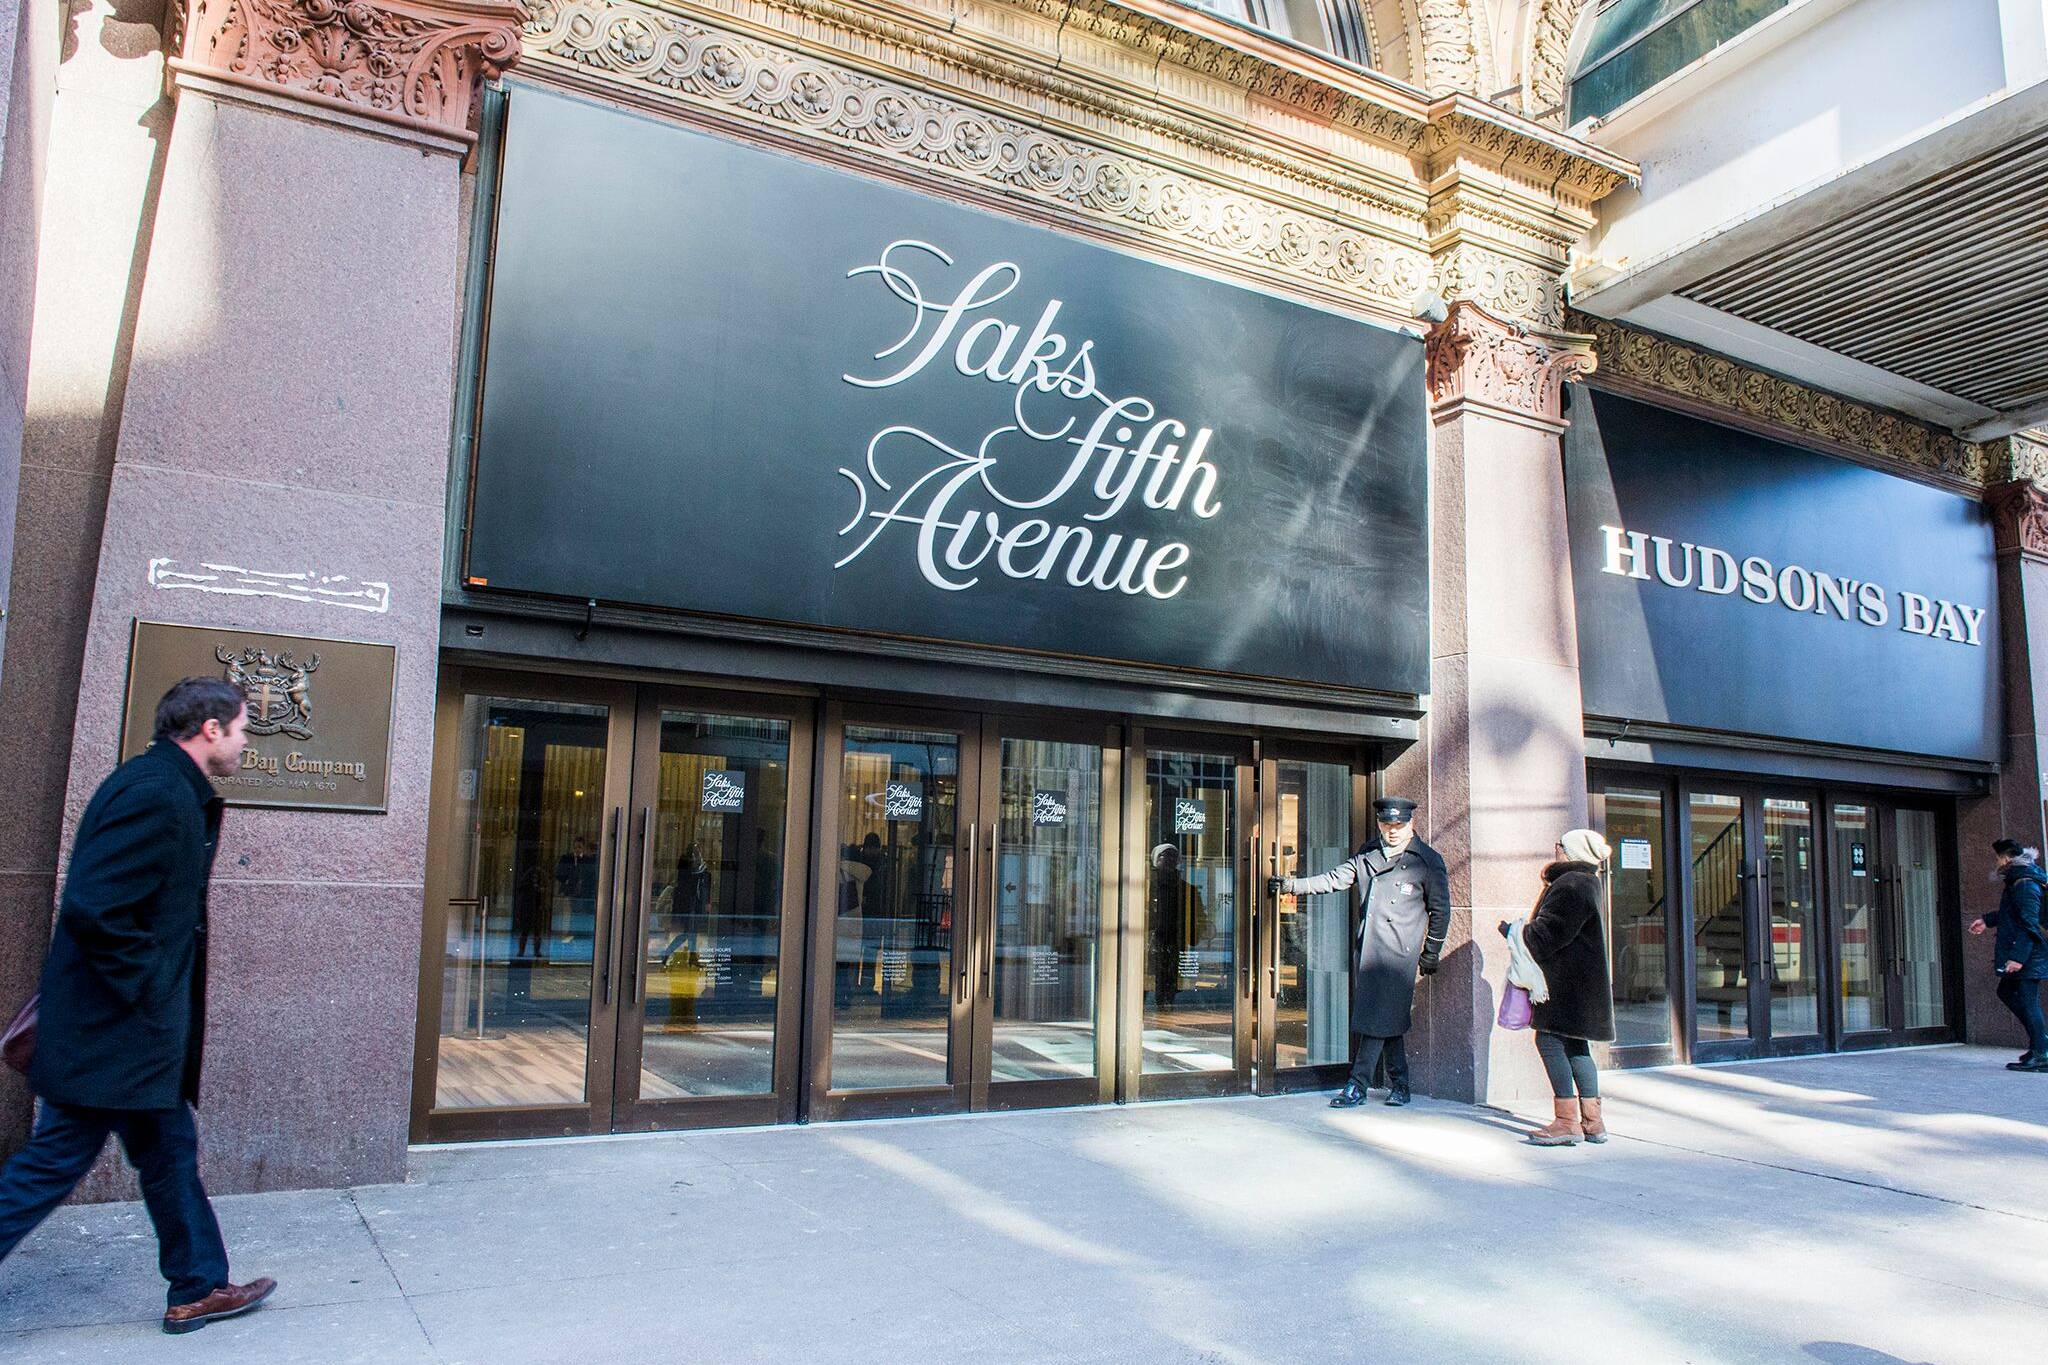 A Saks OFF 5TH location just outside Toronto is closing down for